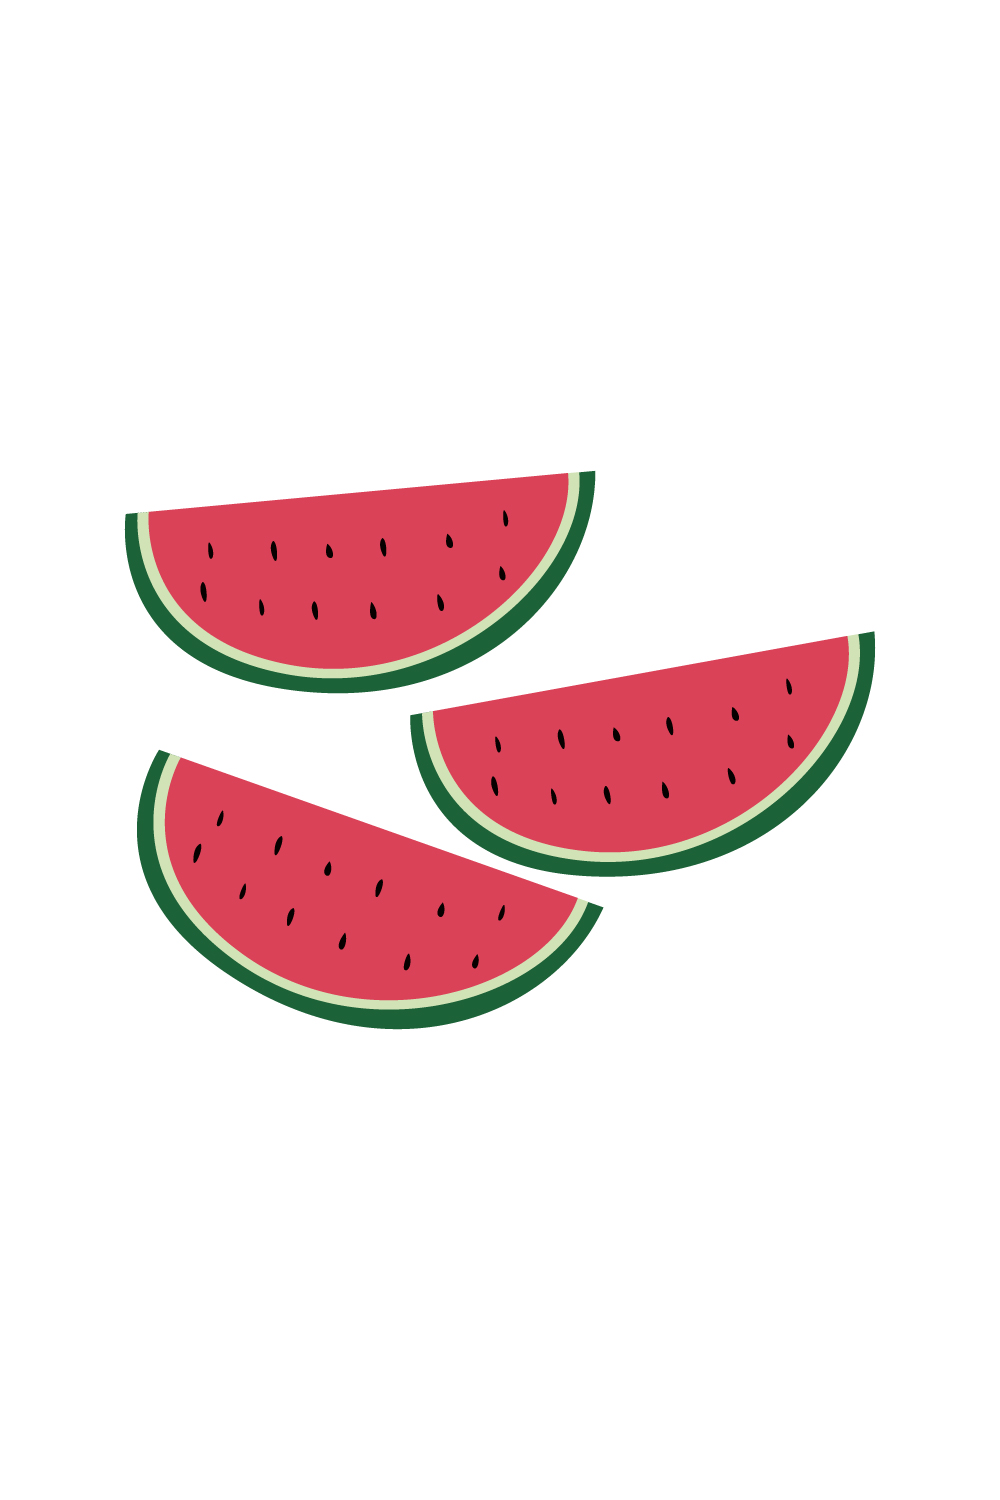 Watermelon Illustration On White Background pinterest preview image.